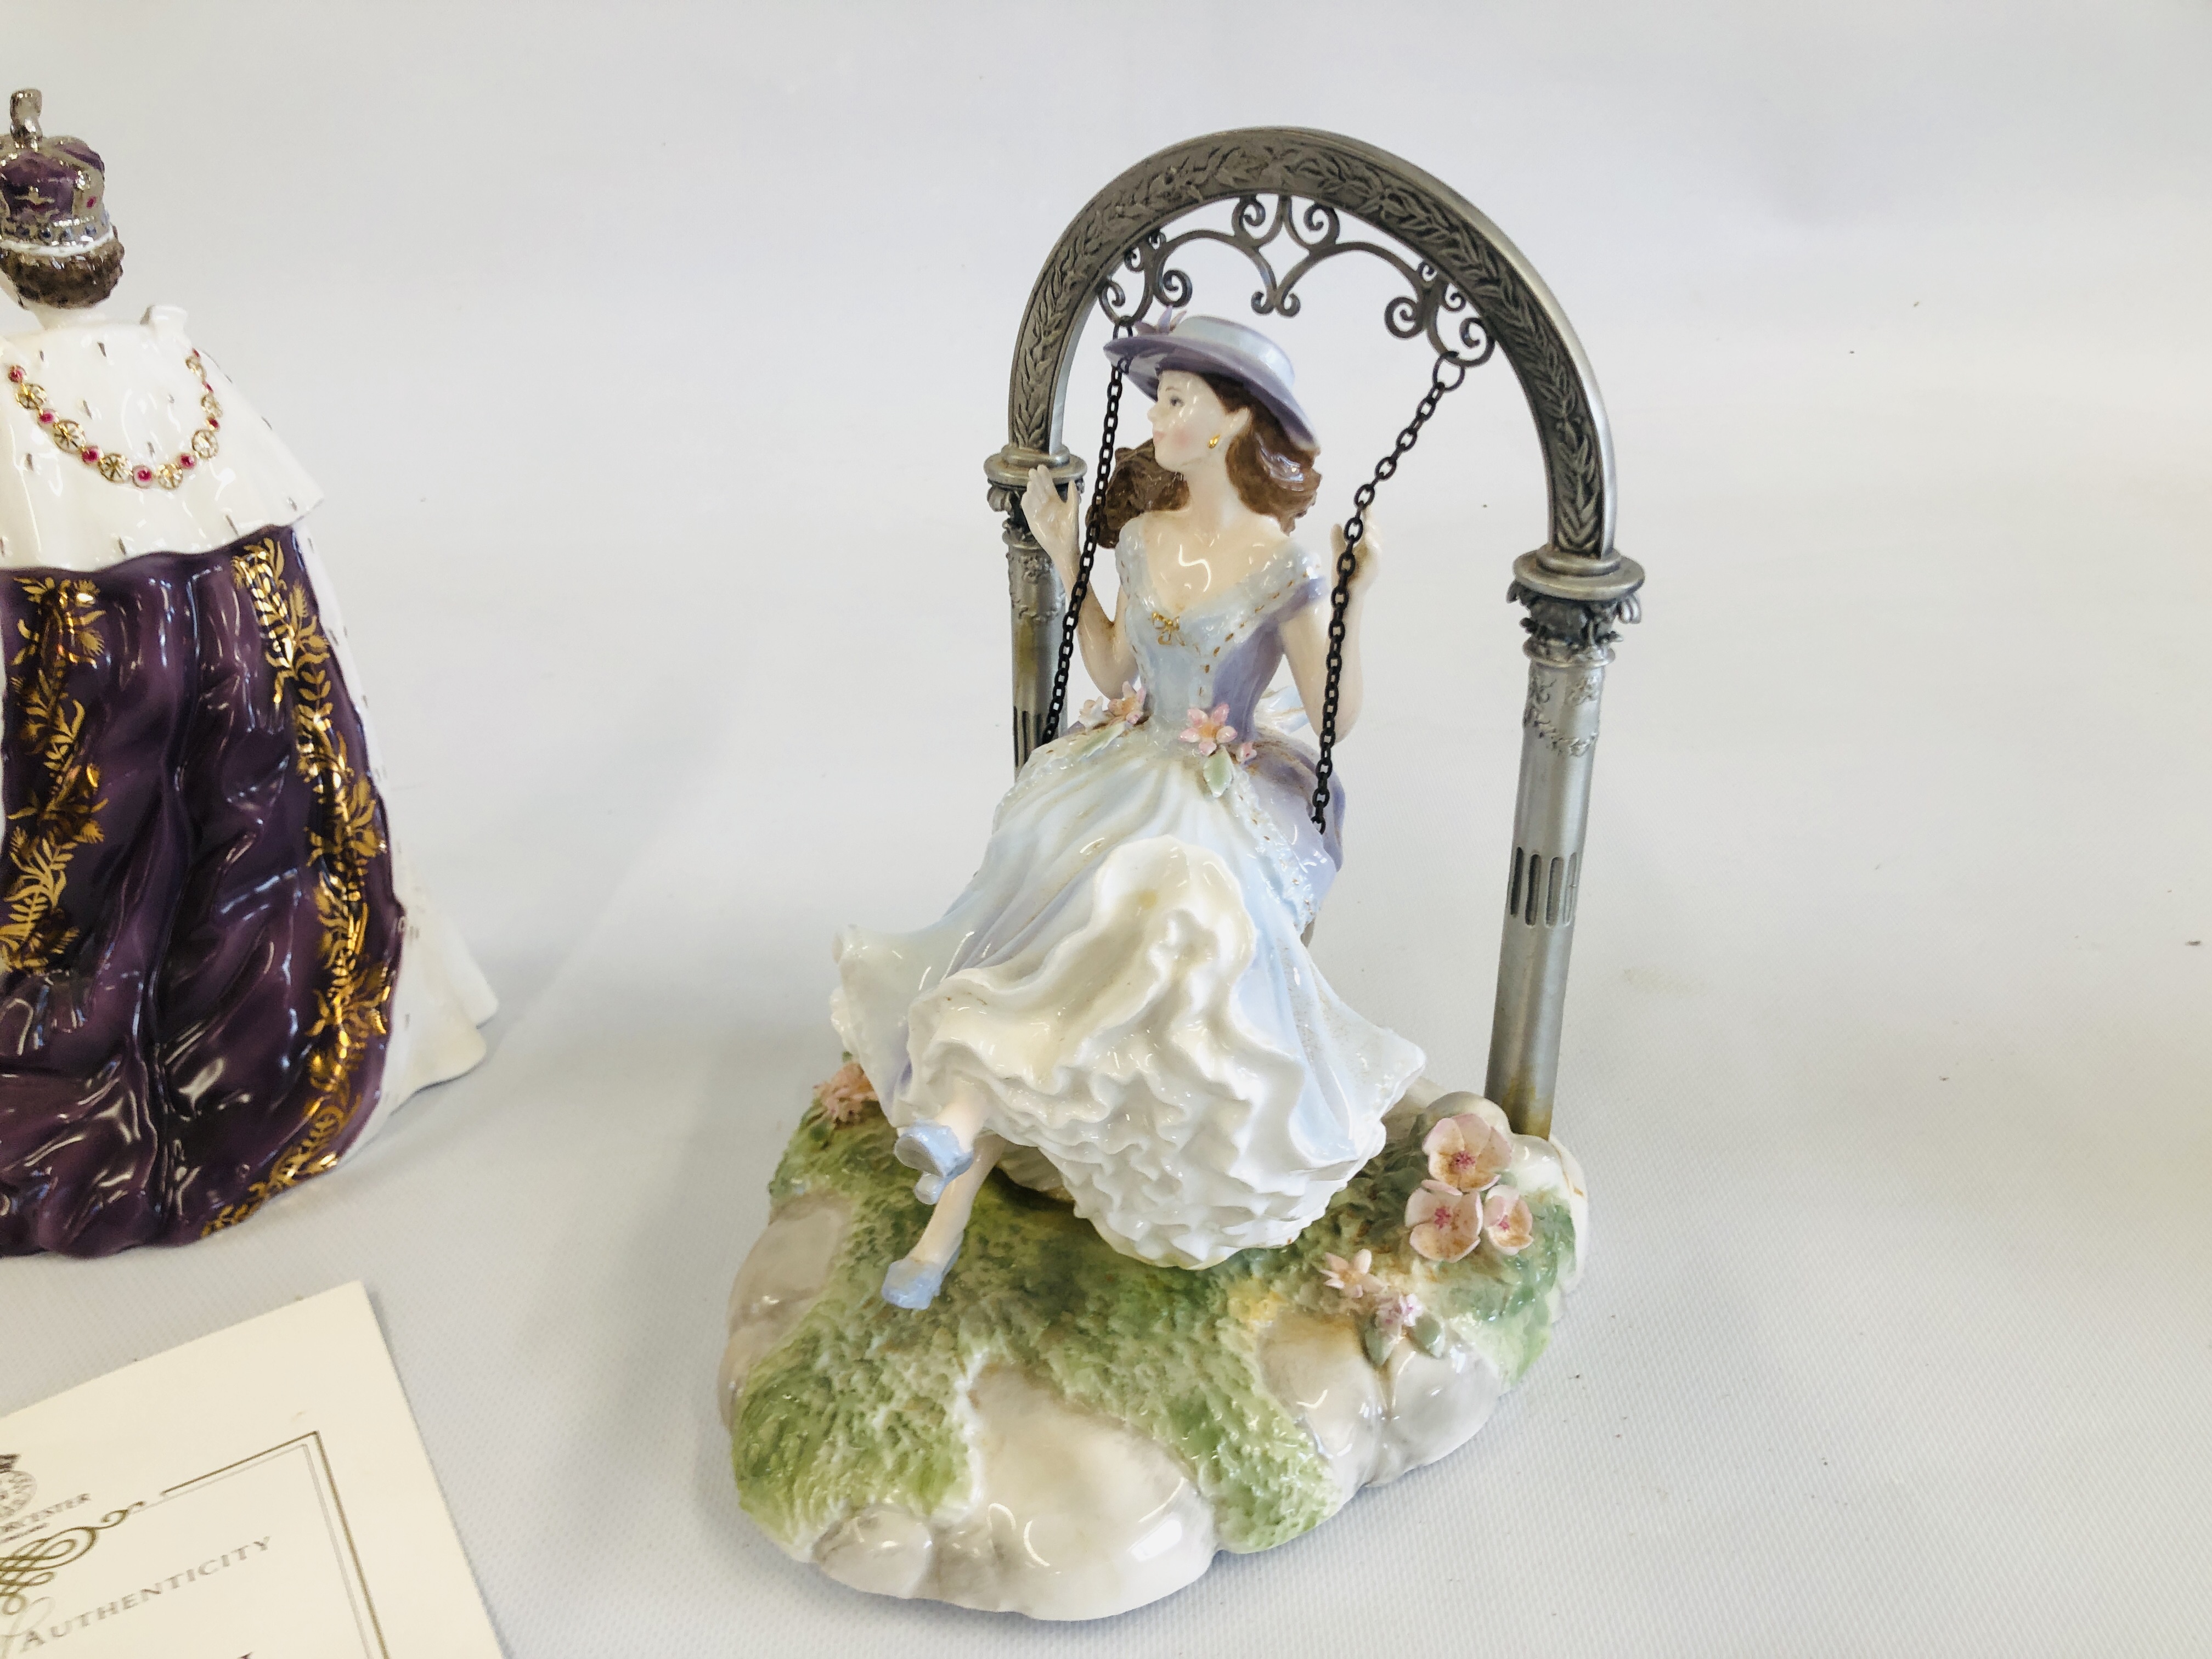 TWO ROYAL WORCESTER FIGURINES TO INCLUDE THE SWING CW519 63/250 AND QUEEN ELIZABETH II 1401/4500. - Image 8 of 14